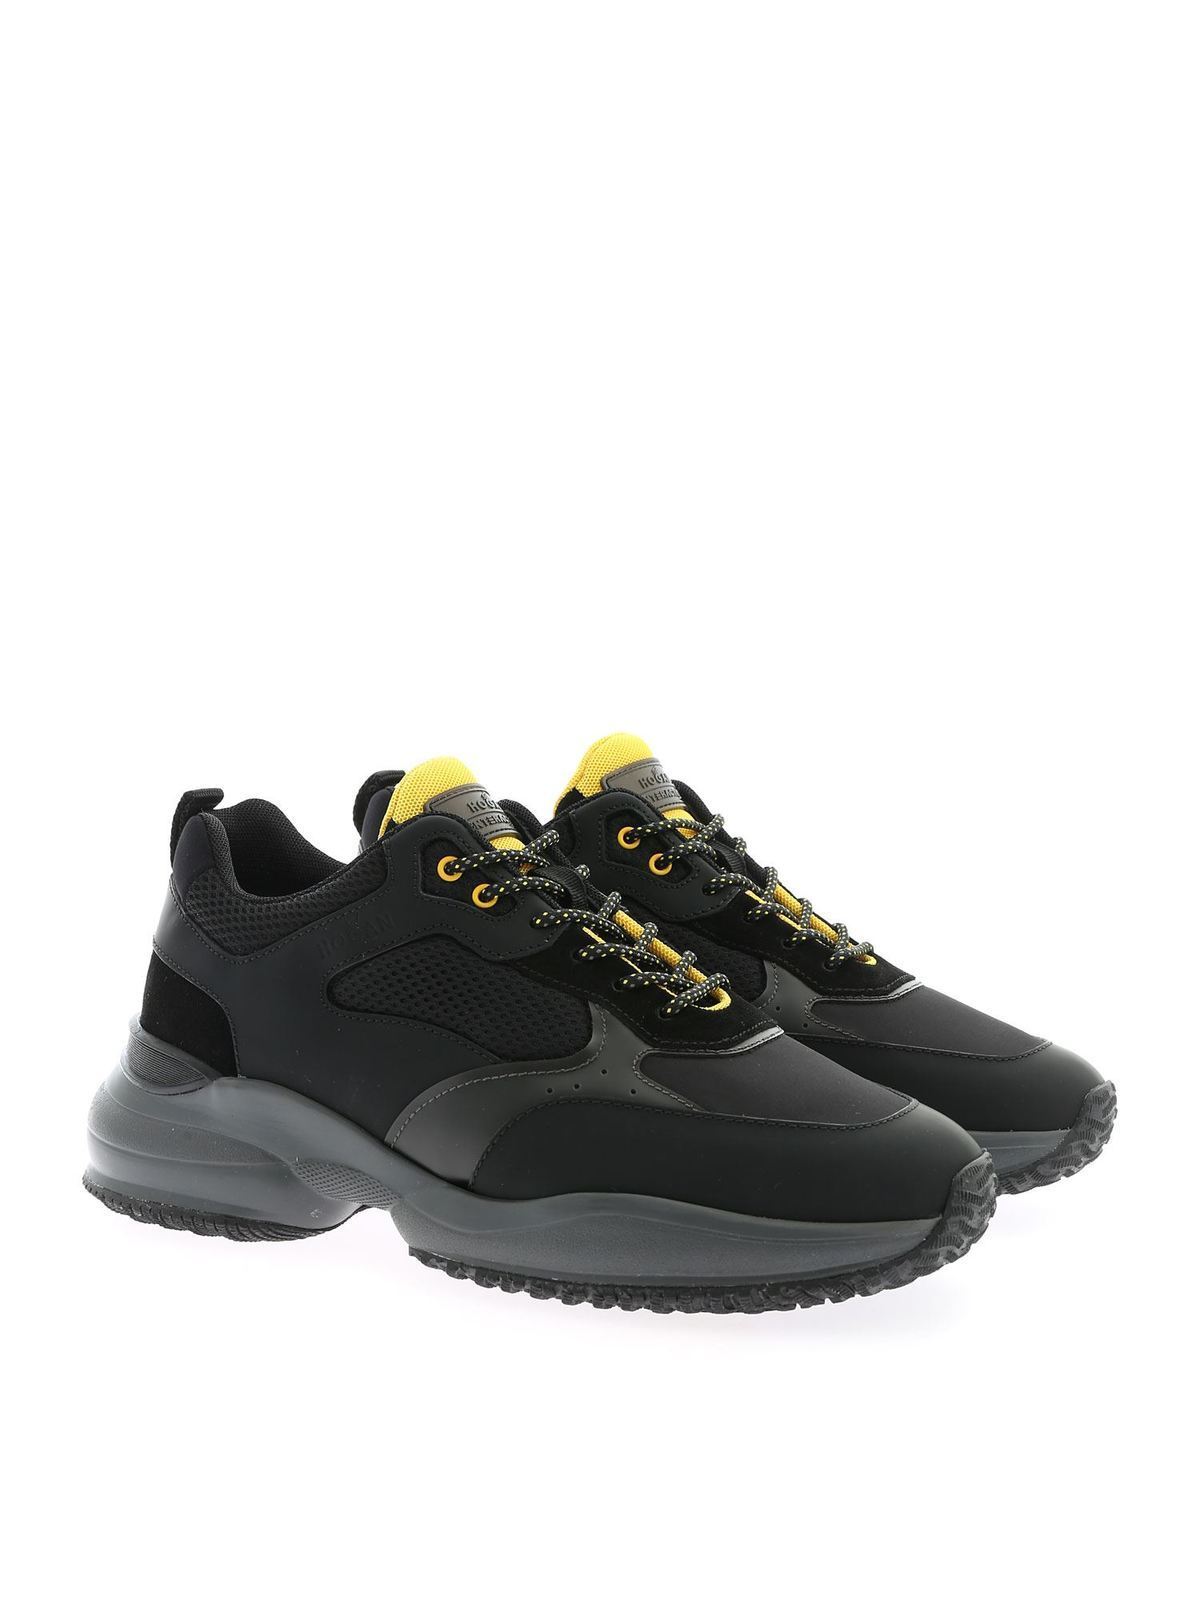 Hogan - Interaction sneakers in black and yellow - trainers ...